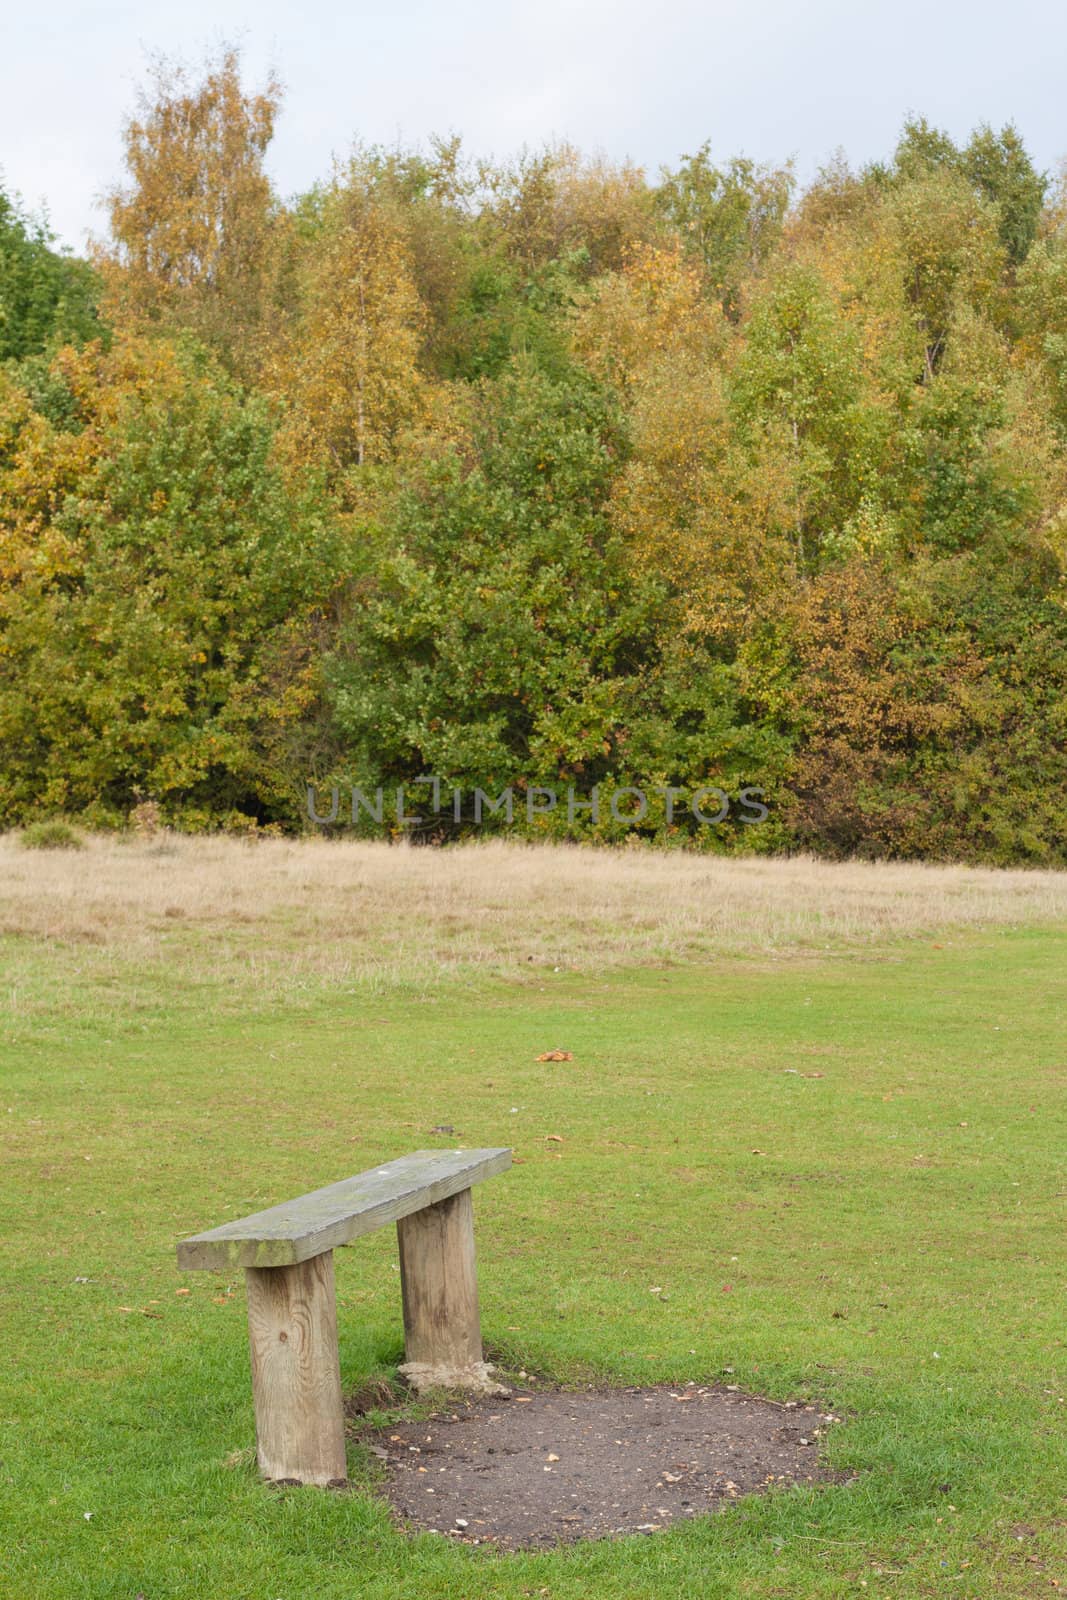 Bench in the countryside in autumn by Brigida_Soriano